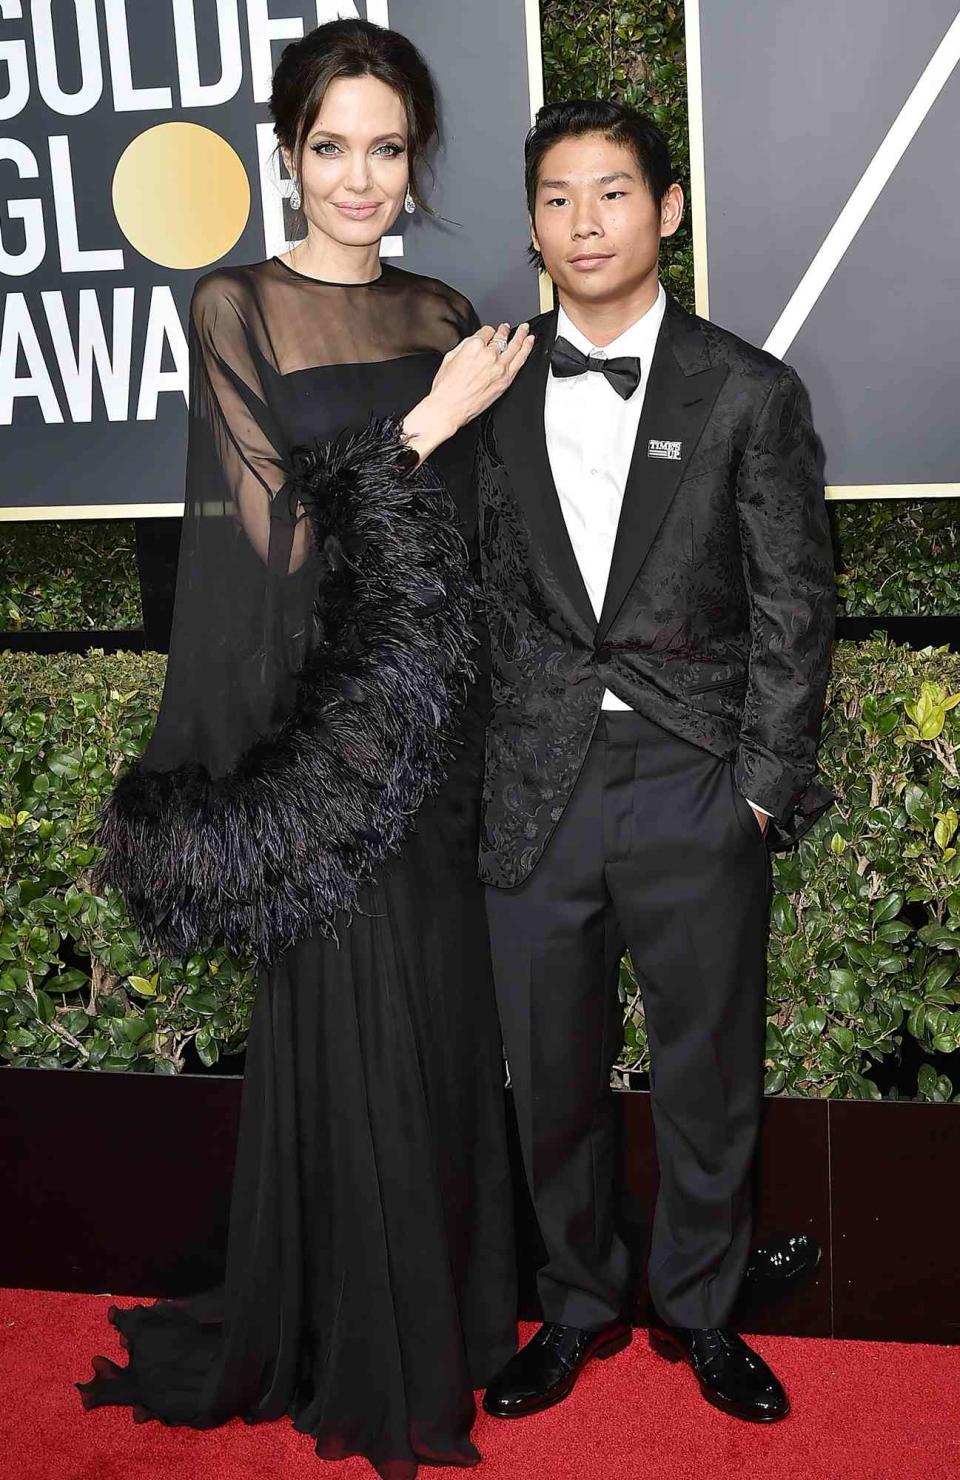 Angelina Jolie and Pax Jolie-Pitt attend the 75th Annual Golden Globe Awards - Arrivals at The Beverly Hilton Hotel on January 7, 2018 in Beverly Hills, California